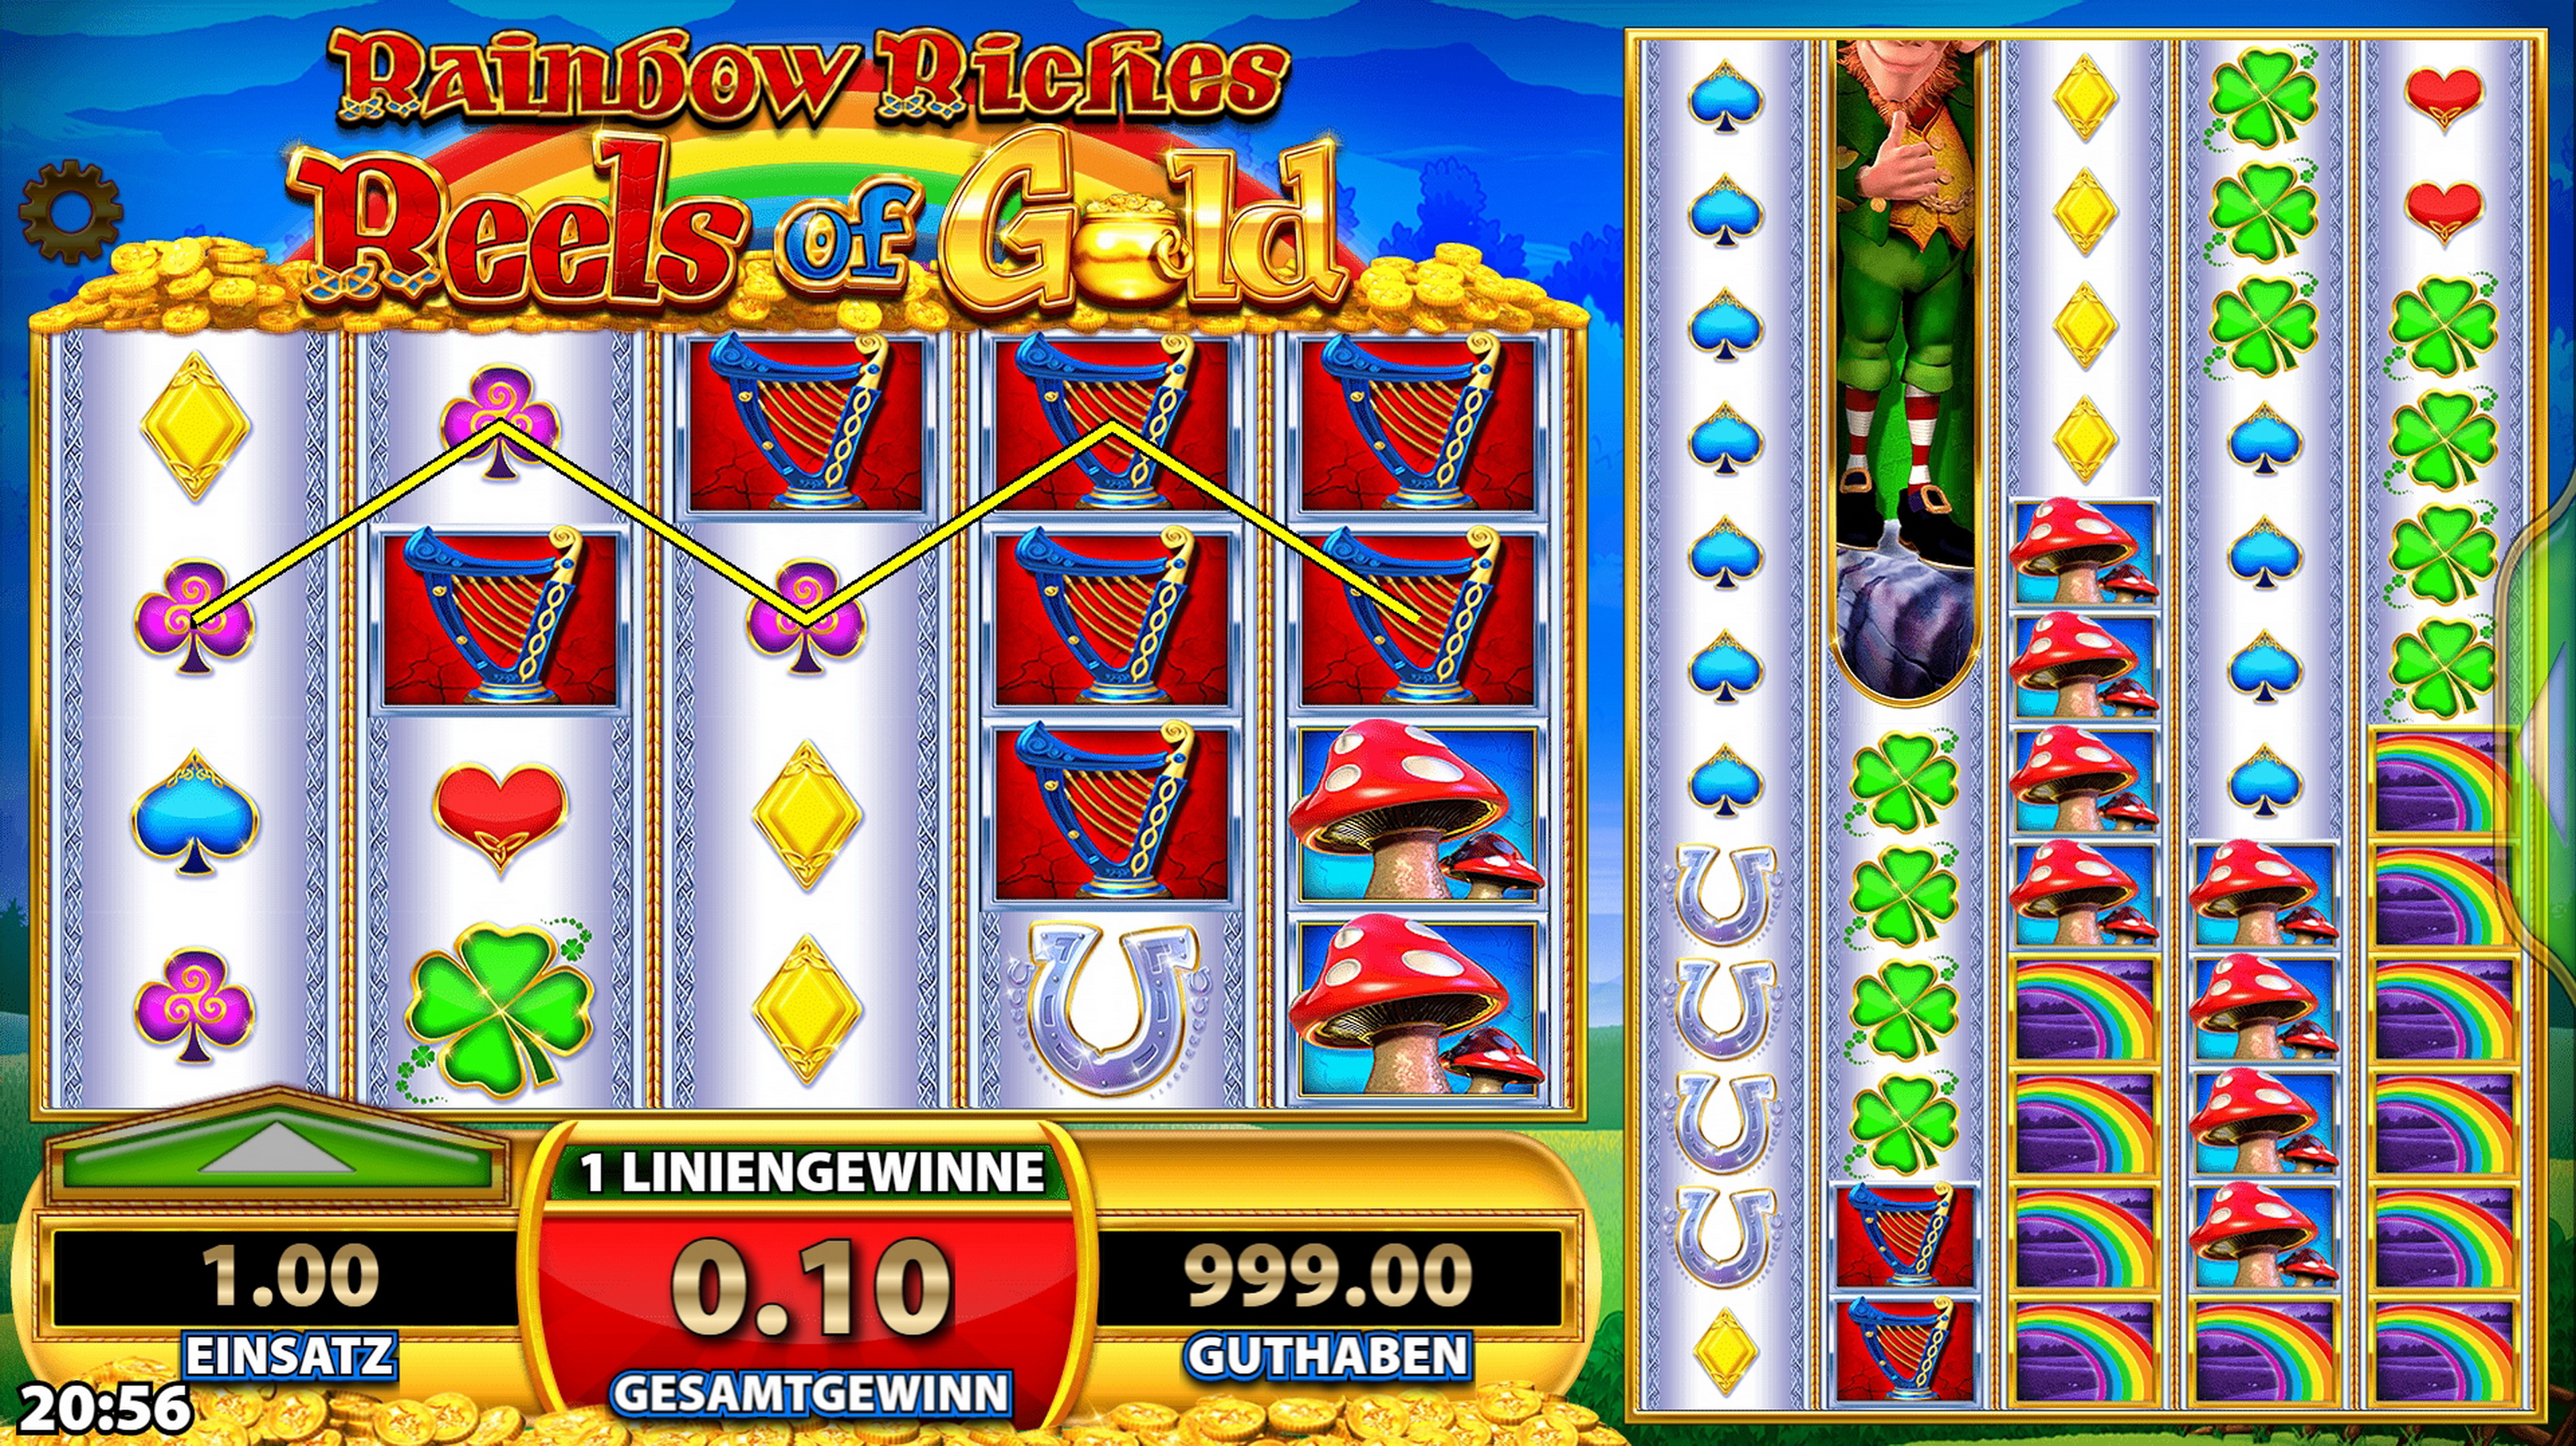 Win Money in Rainbow Riches Reels of Gold Free Slot Game by Barcrest Games